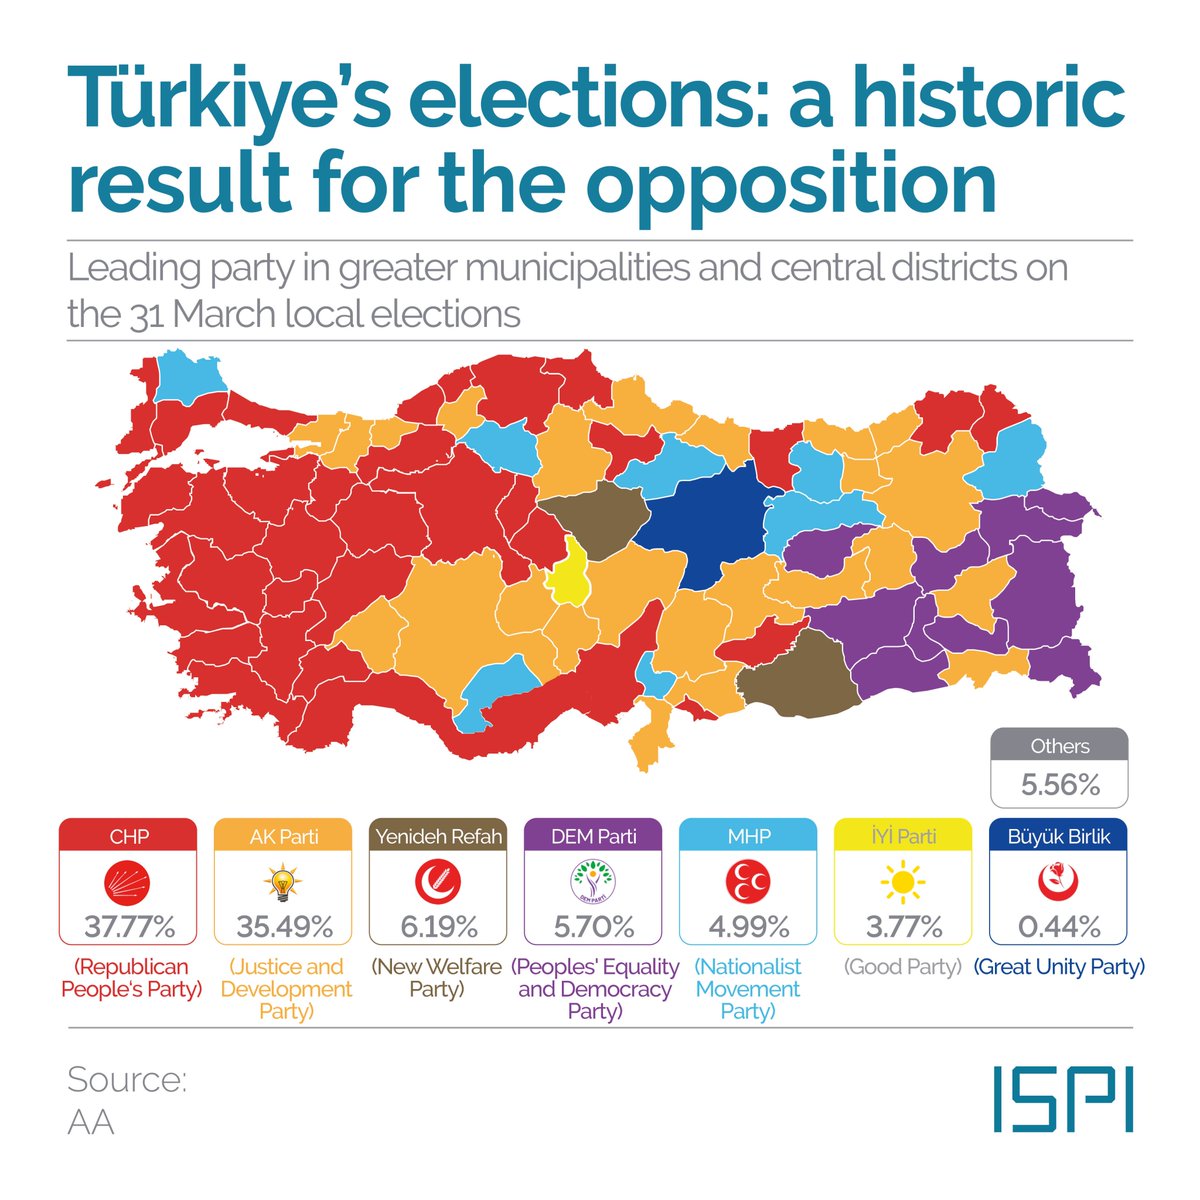 Last Sunday, Turks headed to the polls for local #elections. For the first time in twenty years, #Erdoğan’s party lost the lead in #Türkiye, a historical win for the opposition. What does this result mean for the country? #MEDThisWeek → ispionline.it/it/pubblicazio…